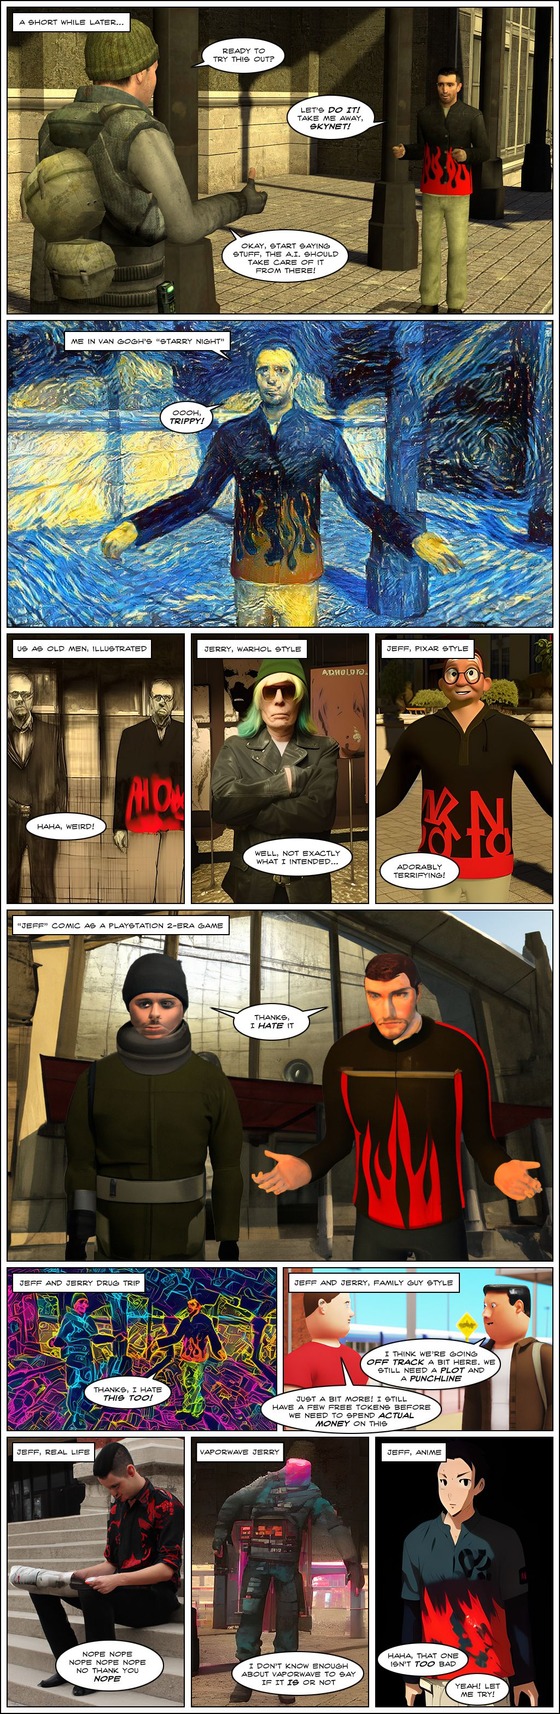 Jeff, one of the original Garry's Mod comic series, turns 18 today and Jeff Eastman made a new comic to celebrate! For want of a Garry's Mod community (alex plz), here's the comic on the Half-Life community. (EDIT: apparently the last two pages didn't get uploaded, maybe I hit the max limit of images? Just read the ending on the site, I guess)

Read the rest of the series over at Metrocop: https://metrocop.net/comics/jeff/